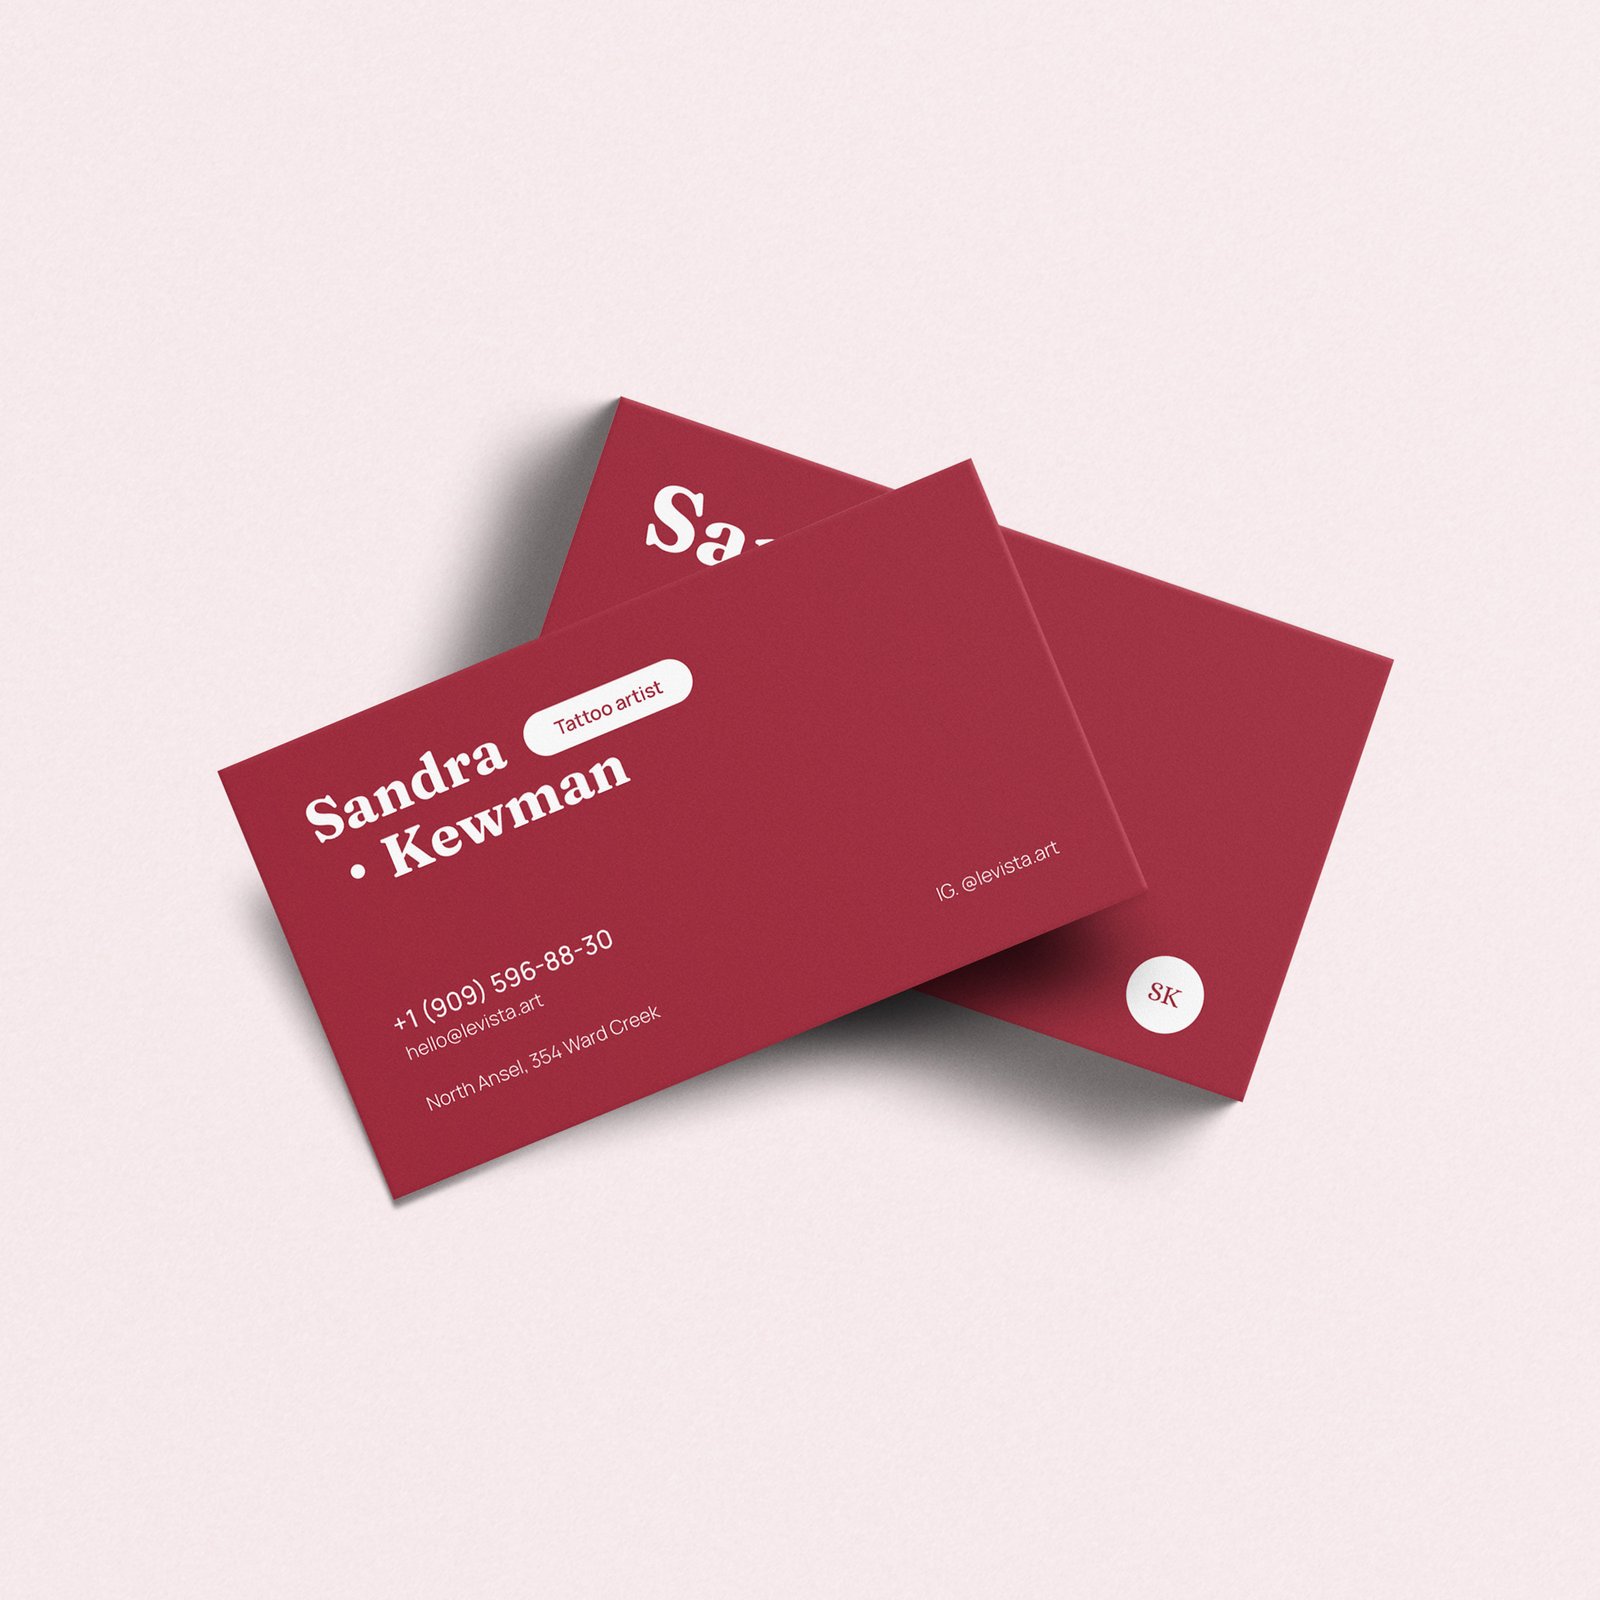 Personal business card 2